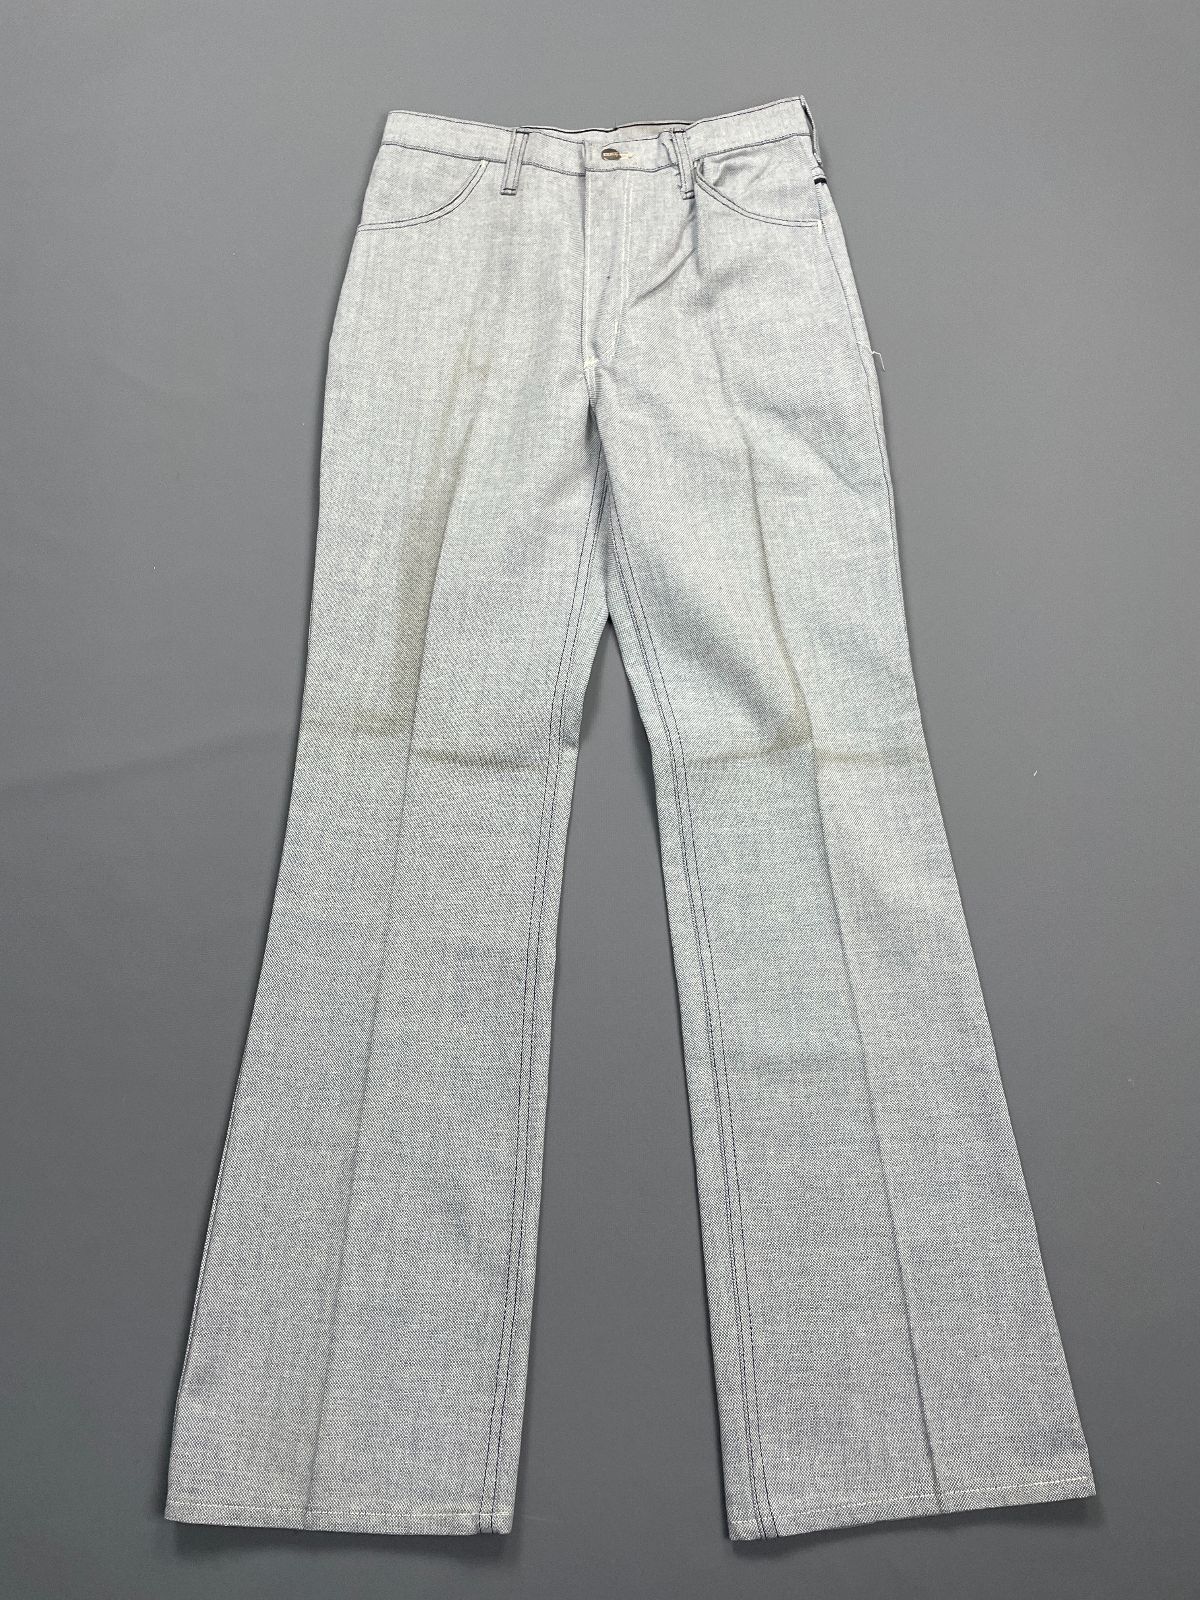 product details: *AS-IS* DEADSTOCK 1970S CONTRAST STITCH COTTON FLARED PERM PRESS TROUSER PANTS photo